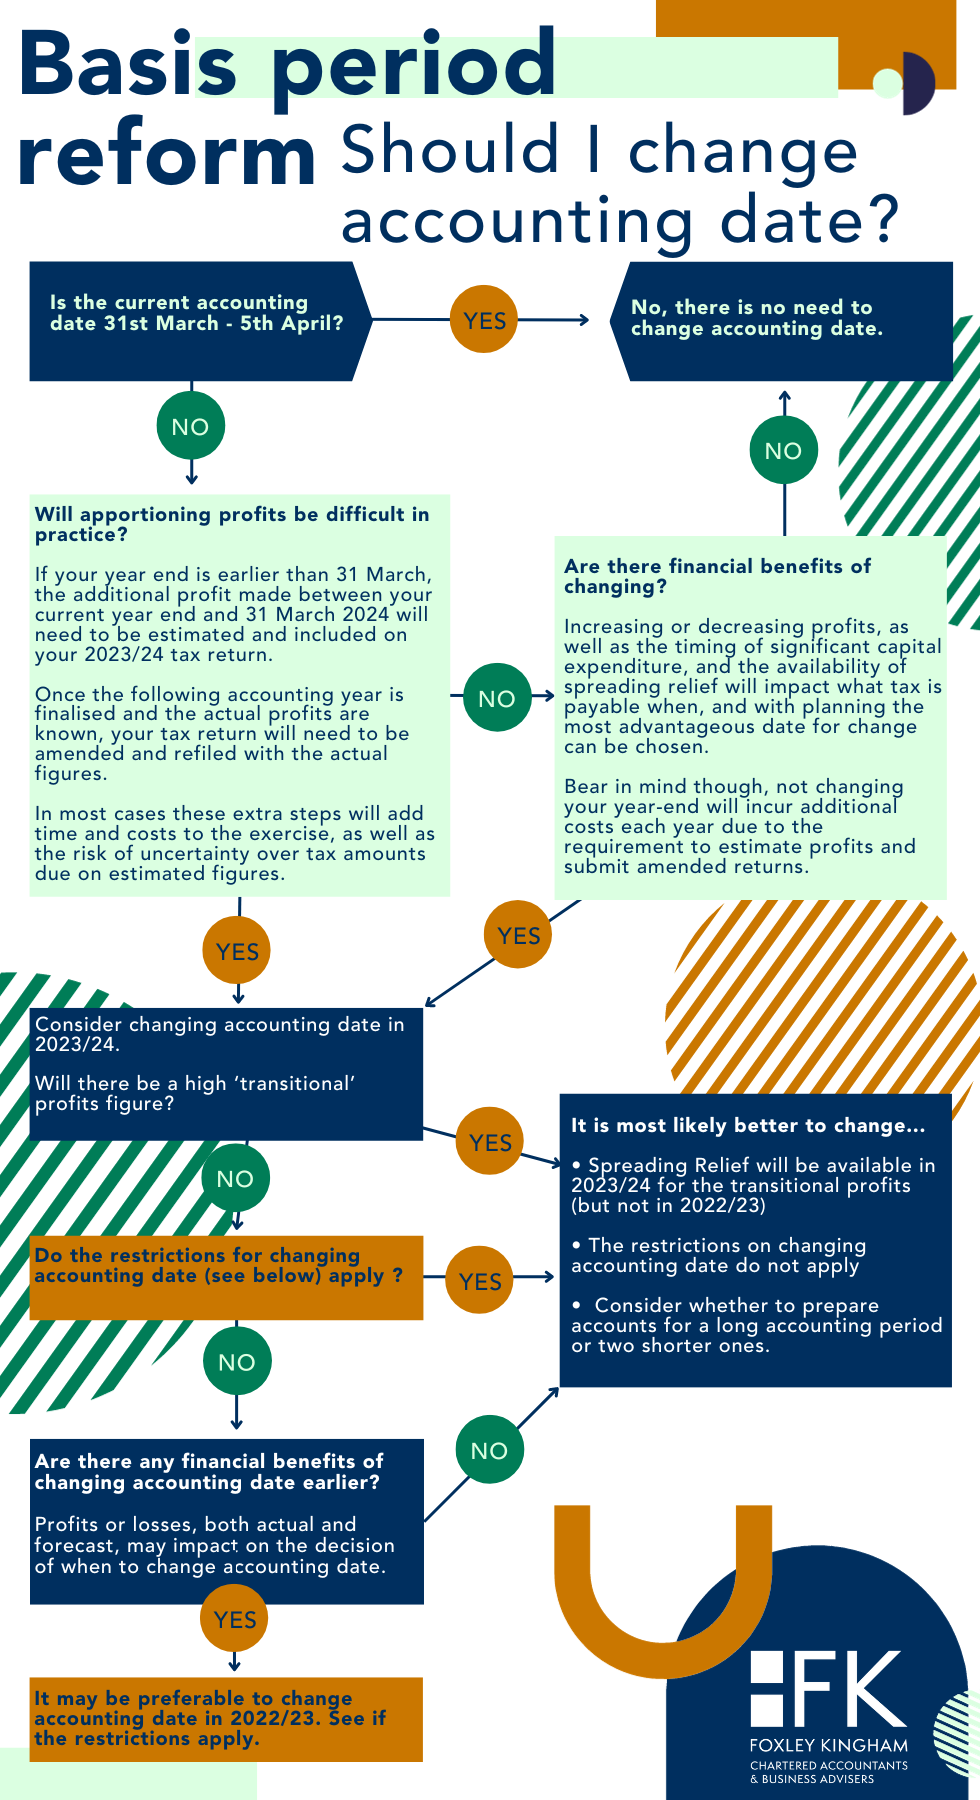 Foxley Kingham Winter Proactivity 2023 basis period reform infographic decision tree